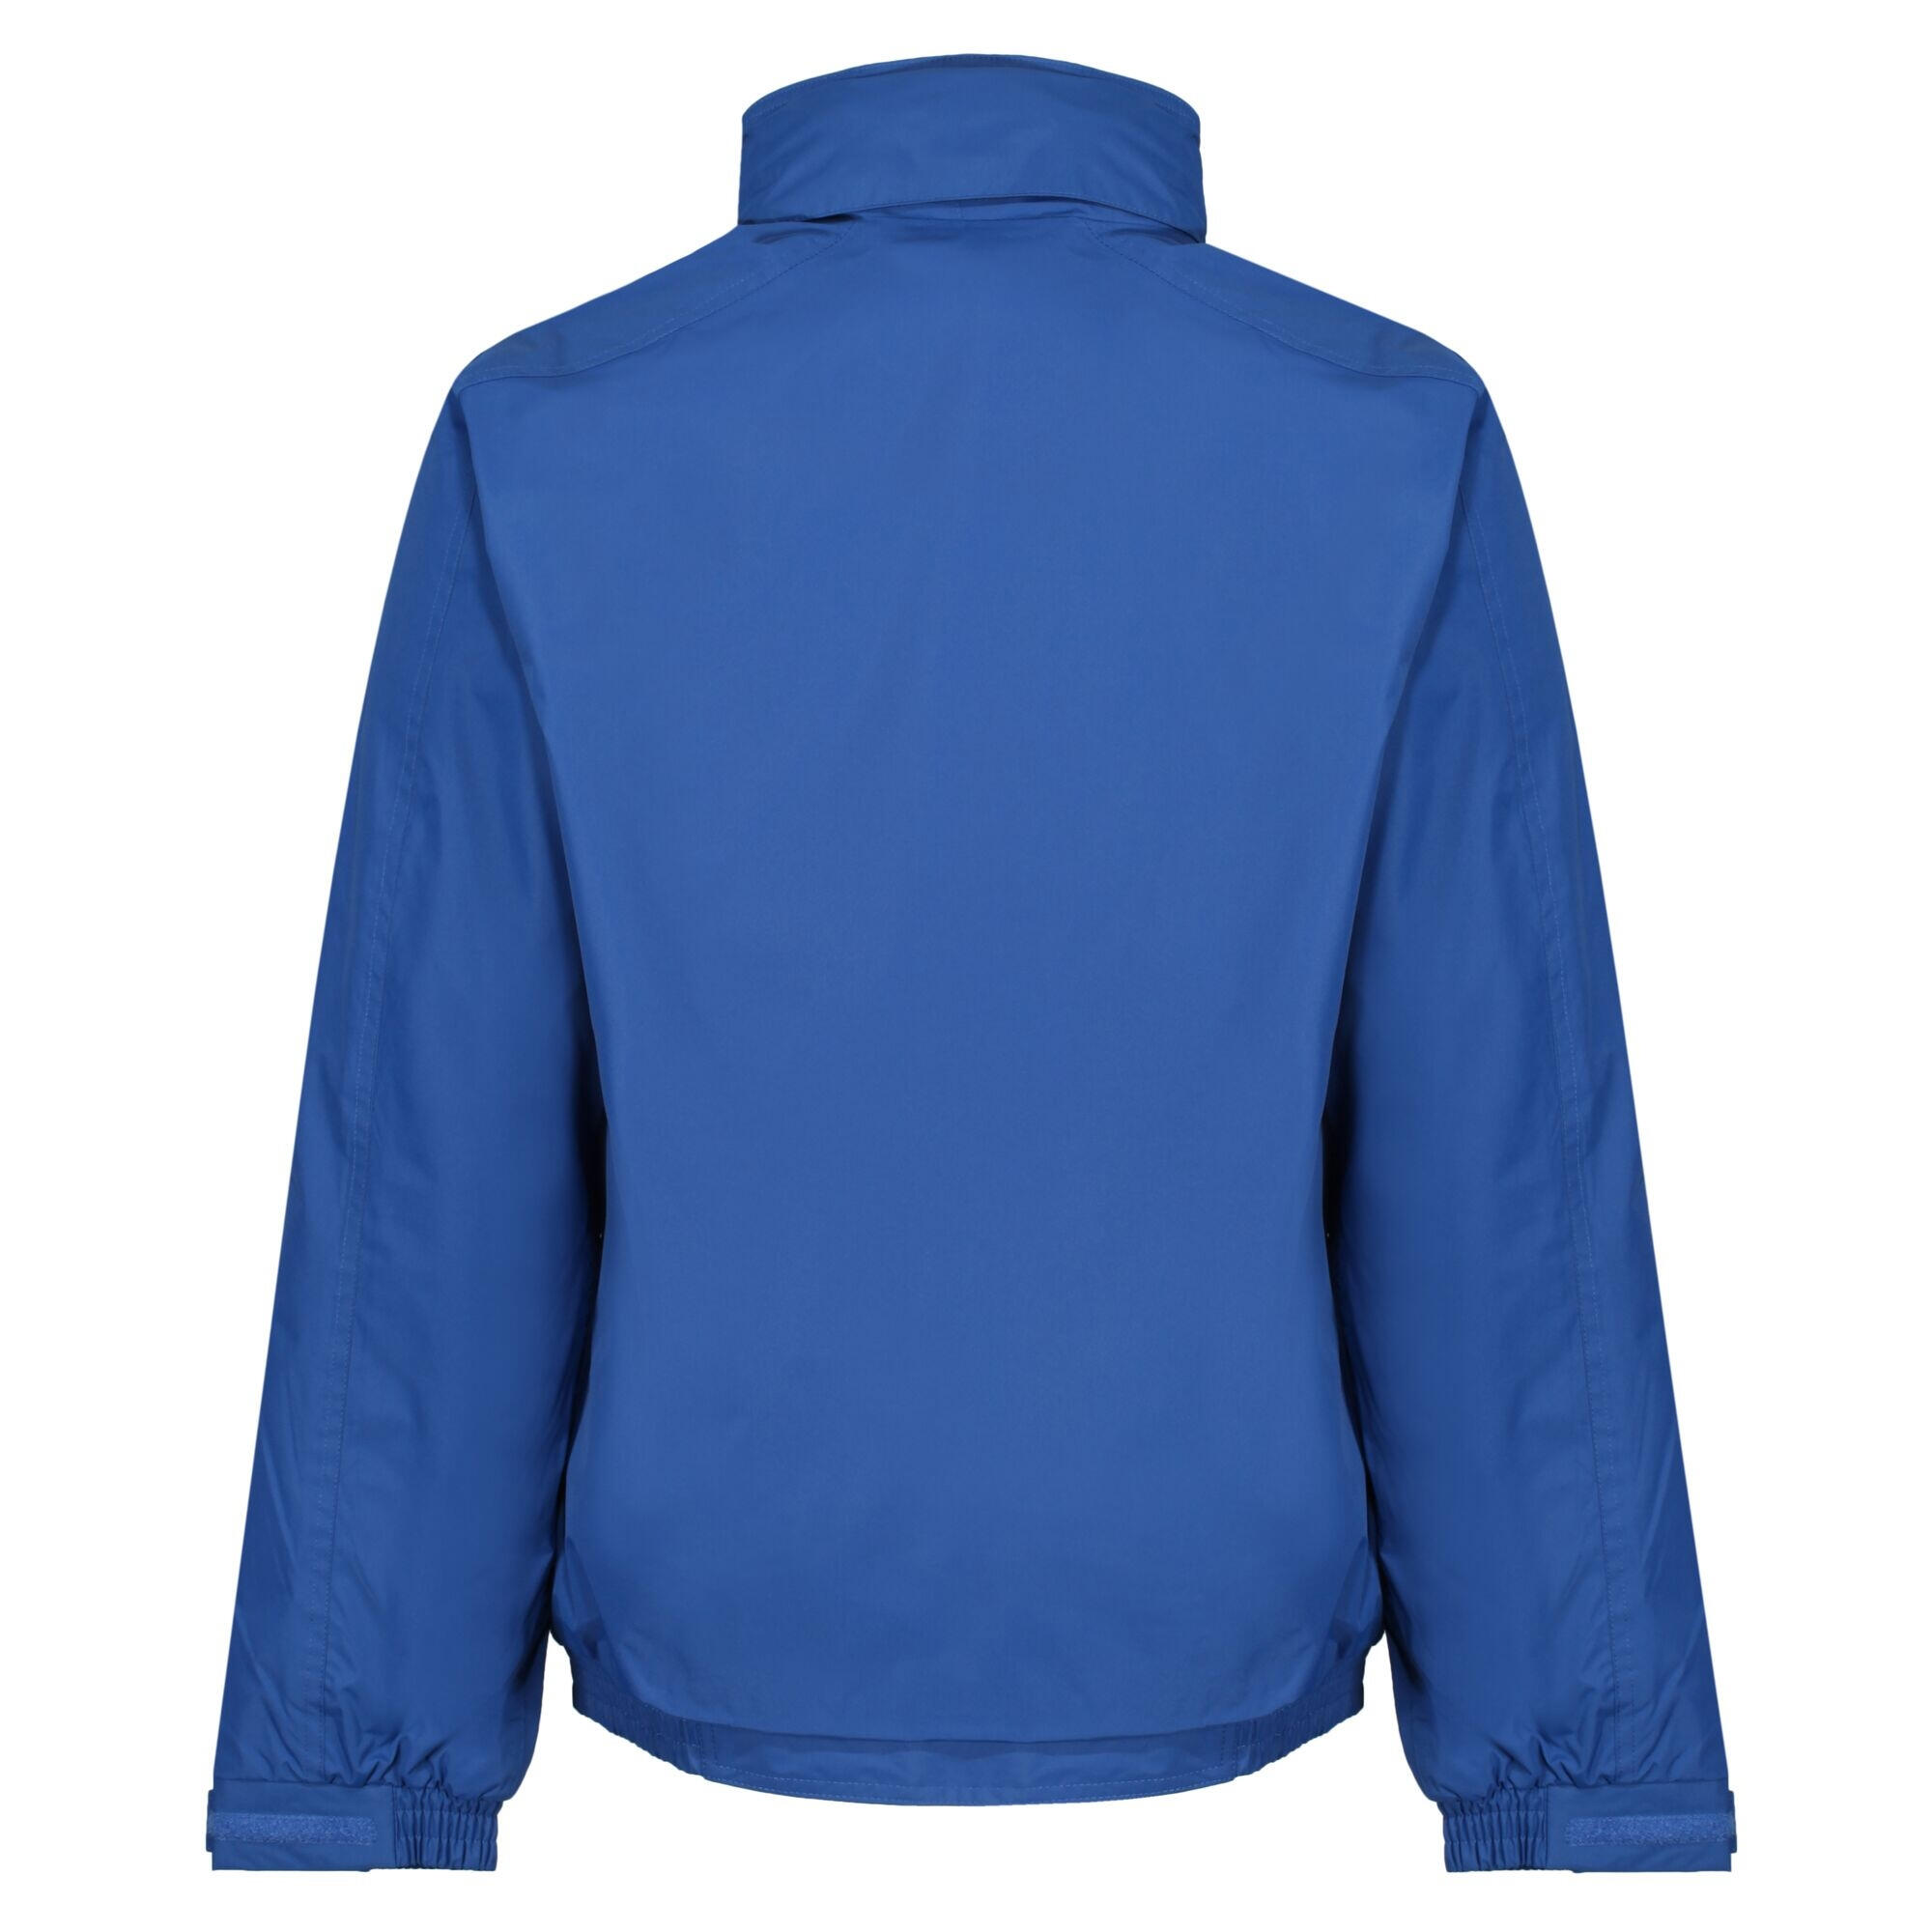 Dover Waterproof Windproof Jacket (ThermoGuard Insulation) (New Royal) 2/3